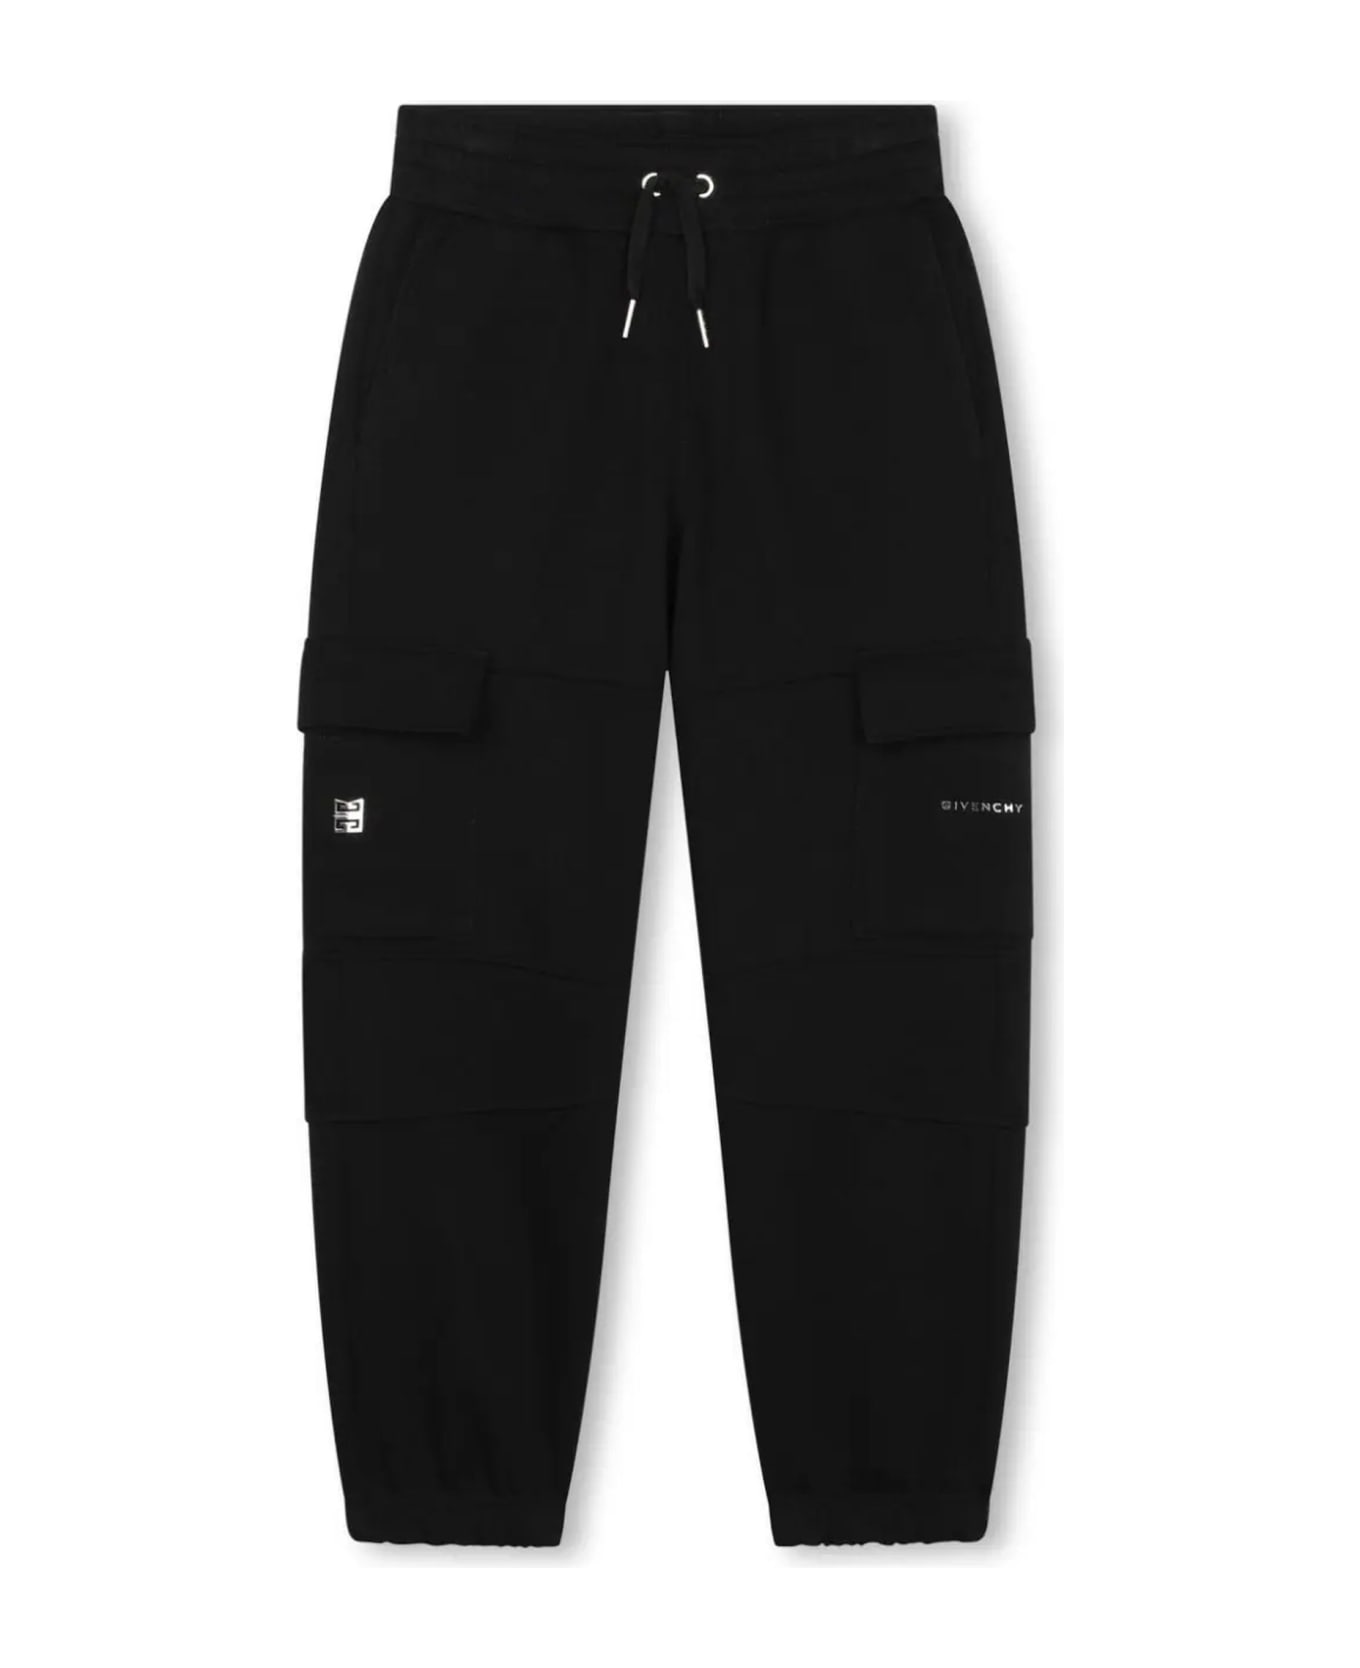 Givenchy Kids Trousers Black - Black ボトムス